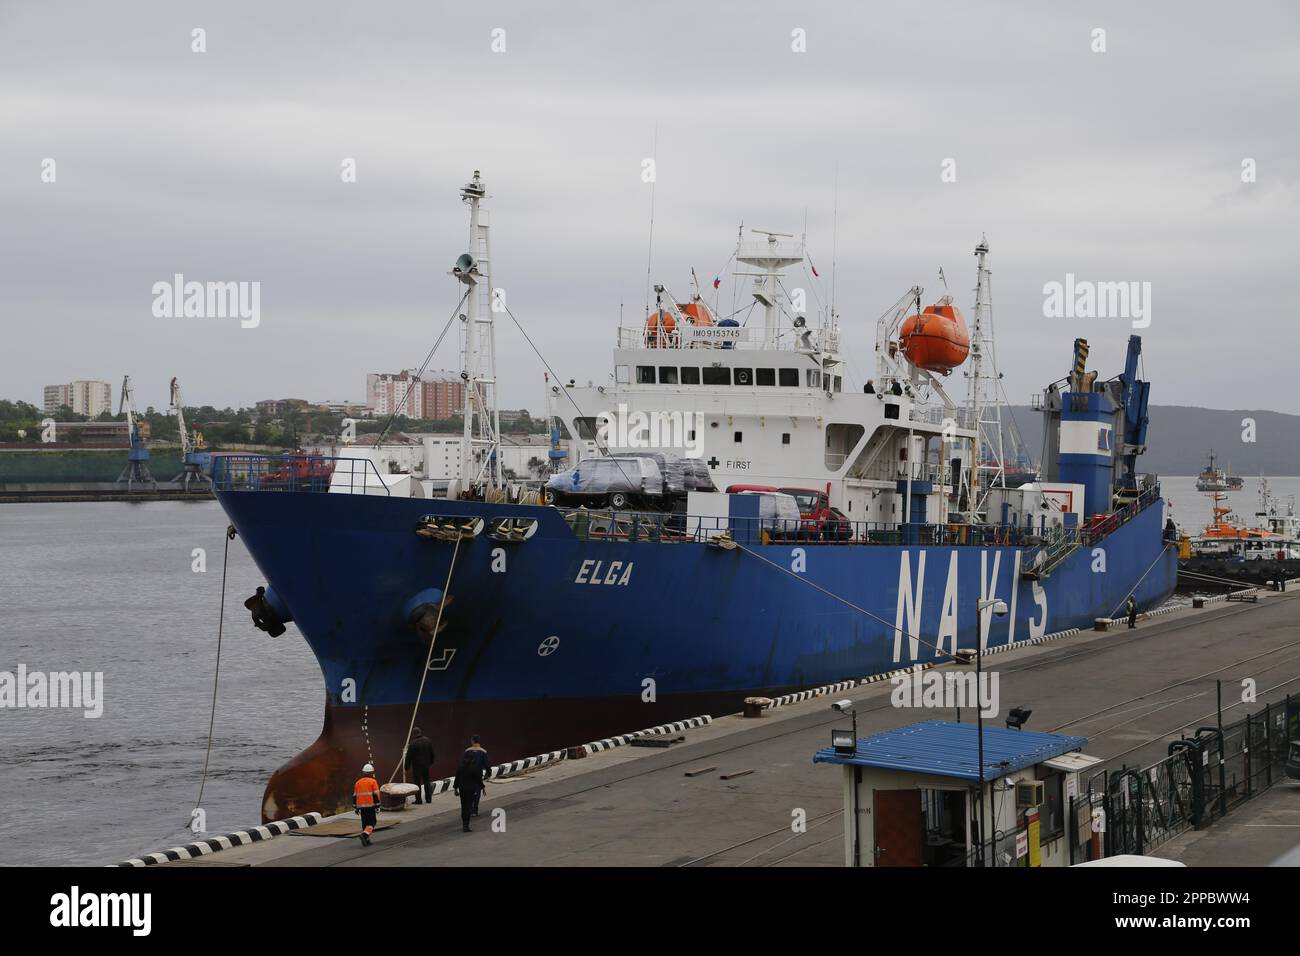 The Elga, a Roll on Roll off ship owned by Navis shipping, photographed in the harbor of Vladivostok, Russia Stock Photo